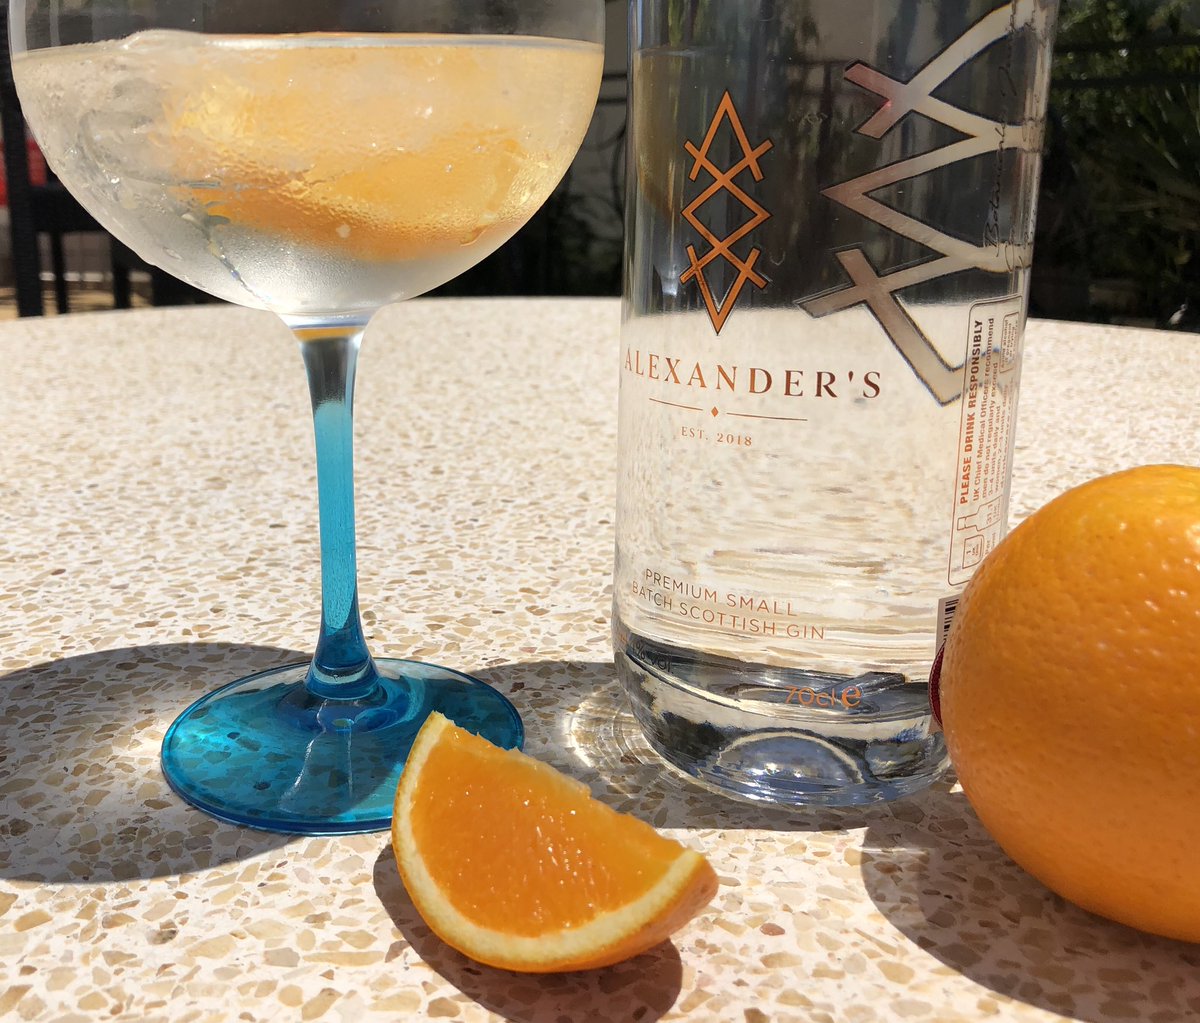 We made a sundial today, and it said it’s time! Just close your eyes and your whisked away to exotic places #alexandersgin #DrinkLocal #ScottishGin #gin #scottishproduce #cocktails #drinks #photooftheday #ginandtonic #mixologist #ginlovers #ginoclock #cheers #tonic #ginlover